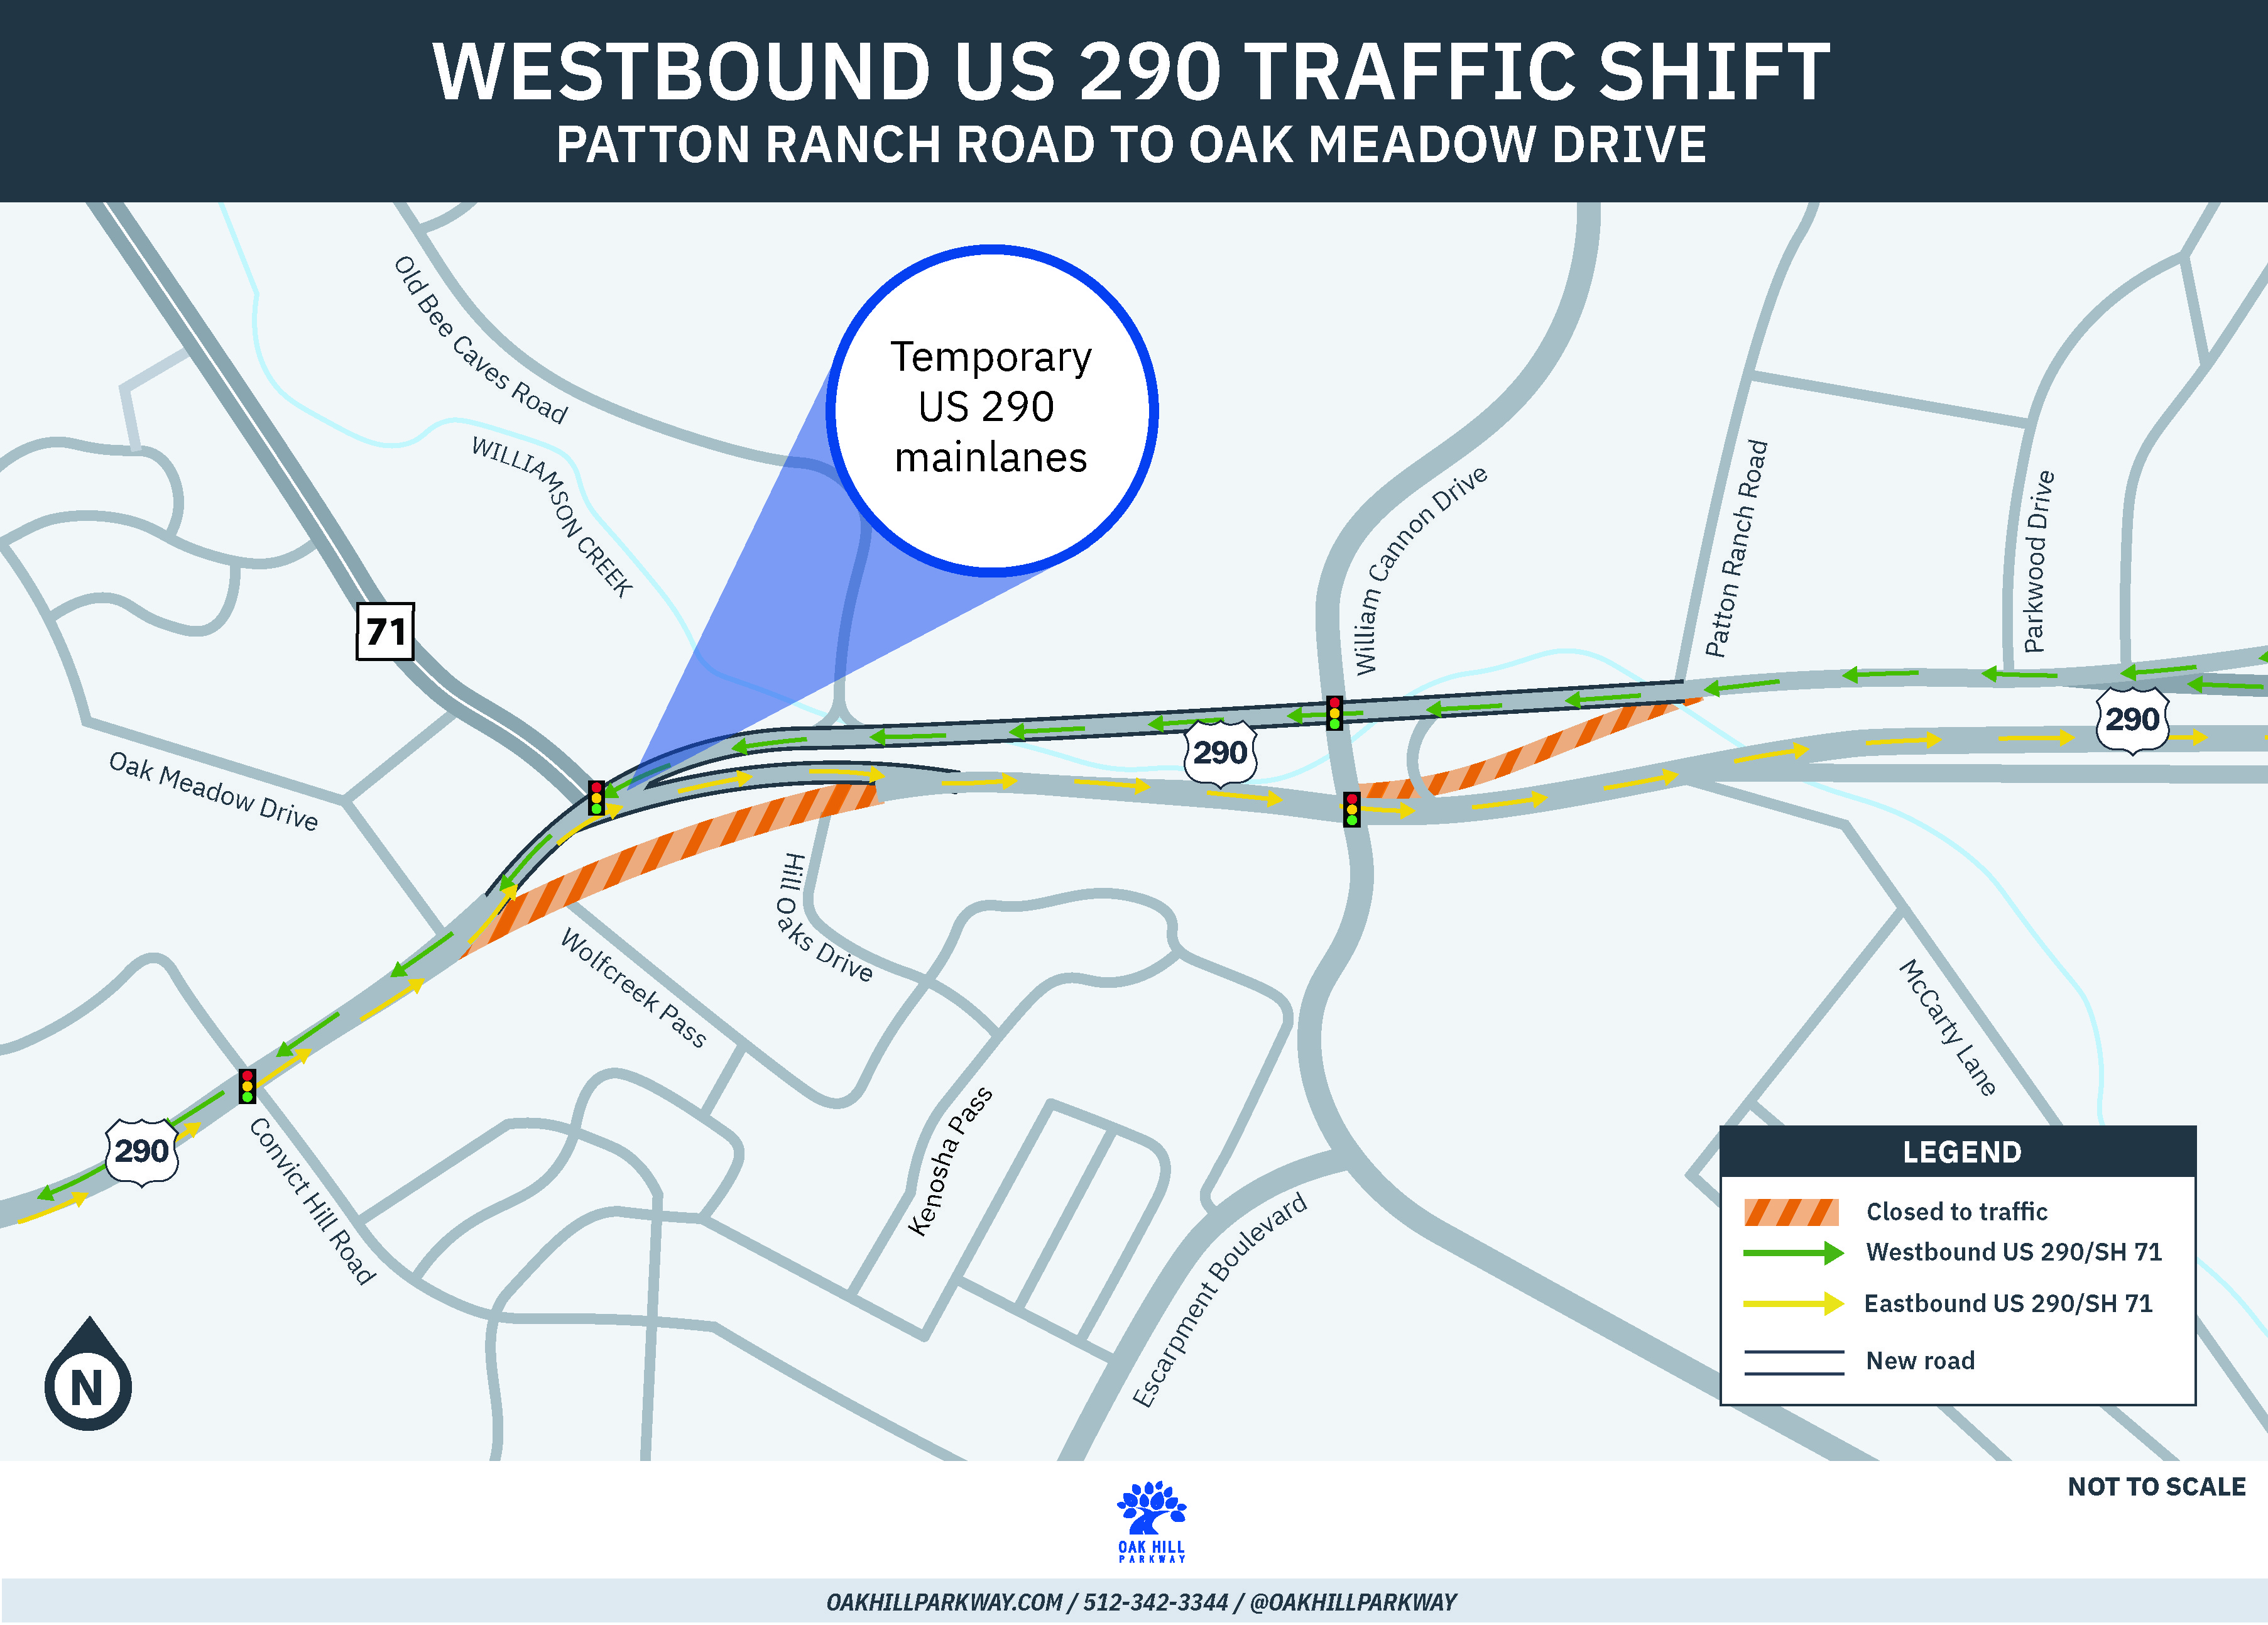 Westbound US 290 frontage road shift